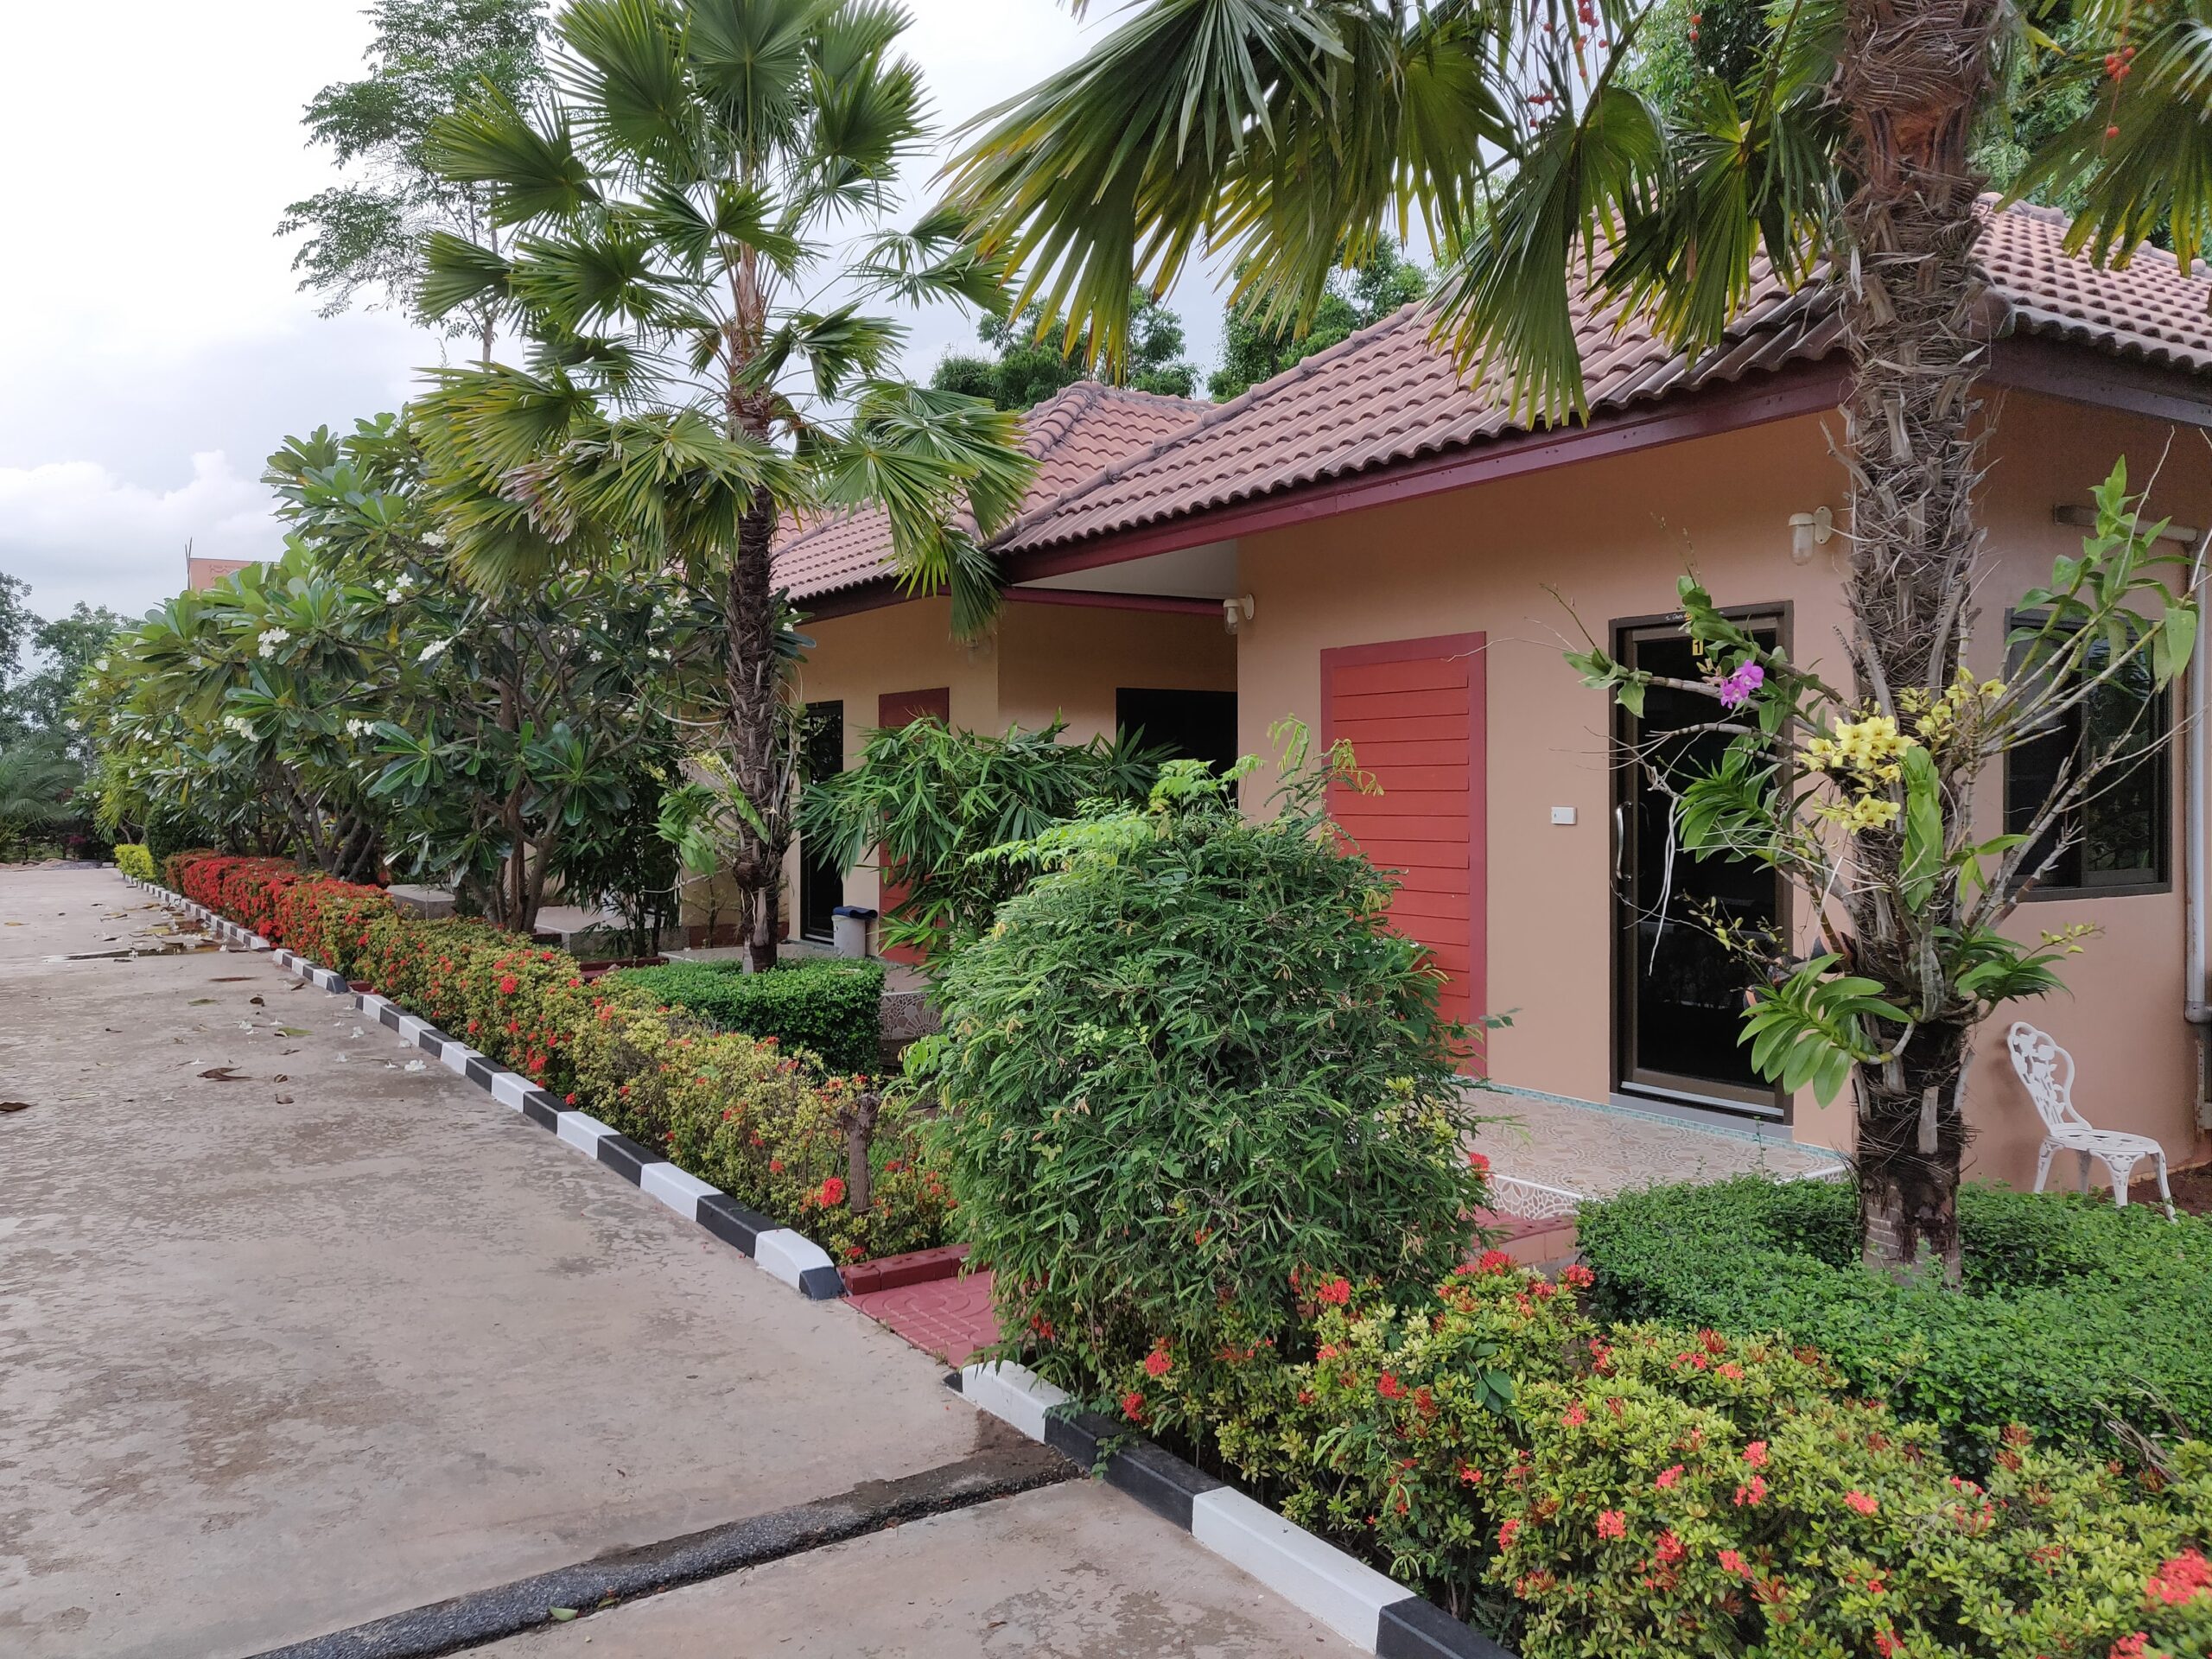 Bungalows for your comfort and privacy